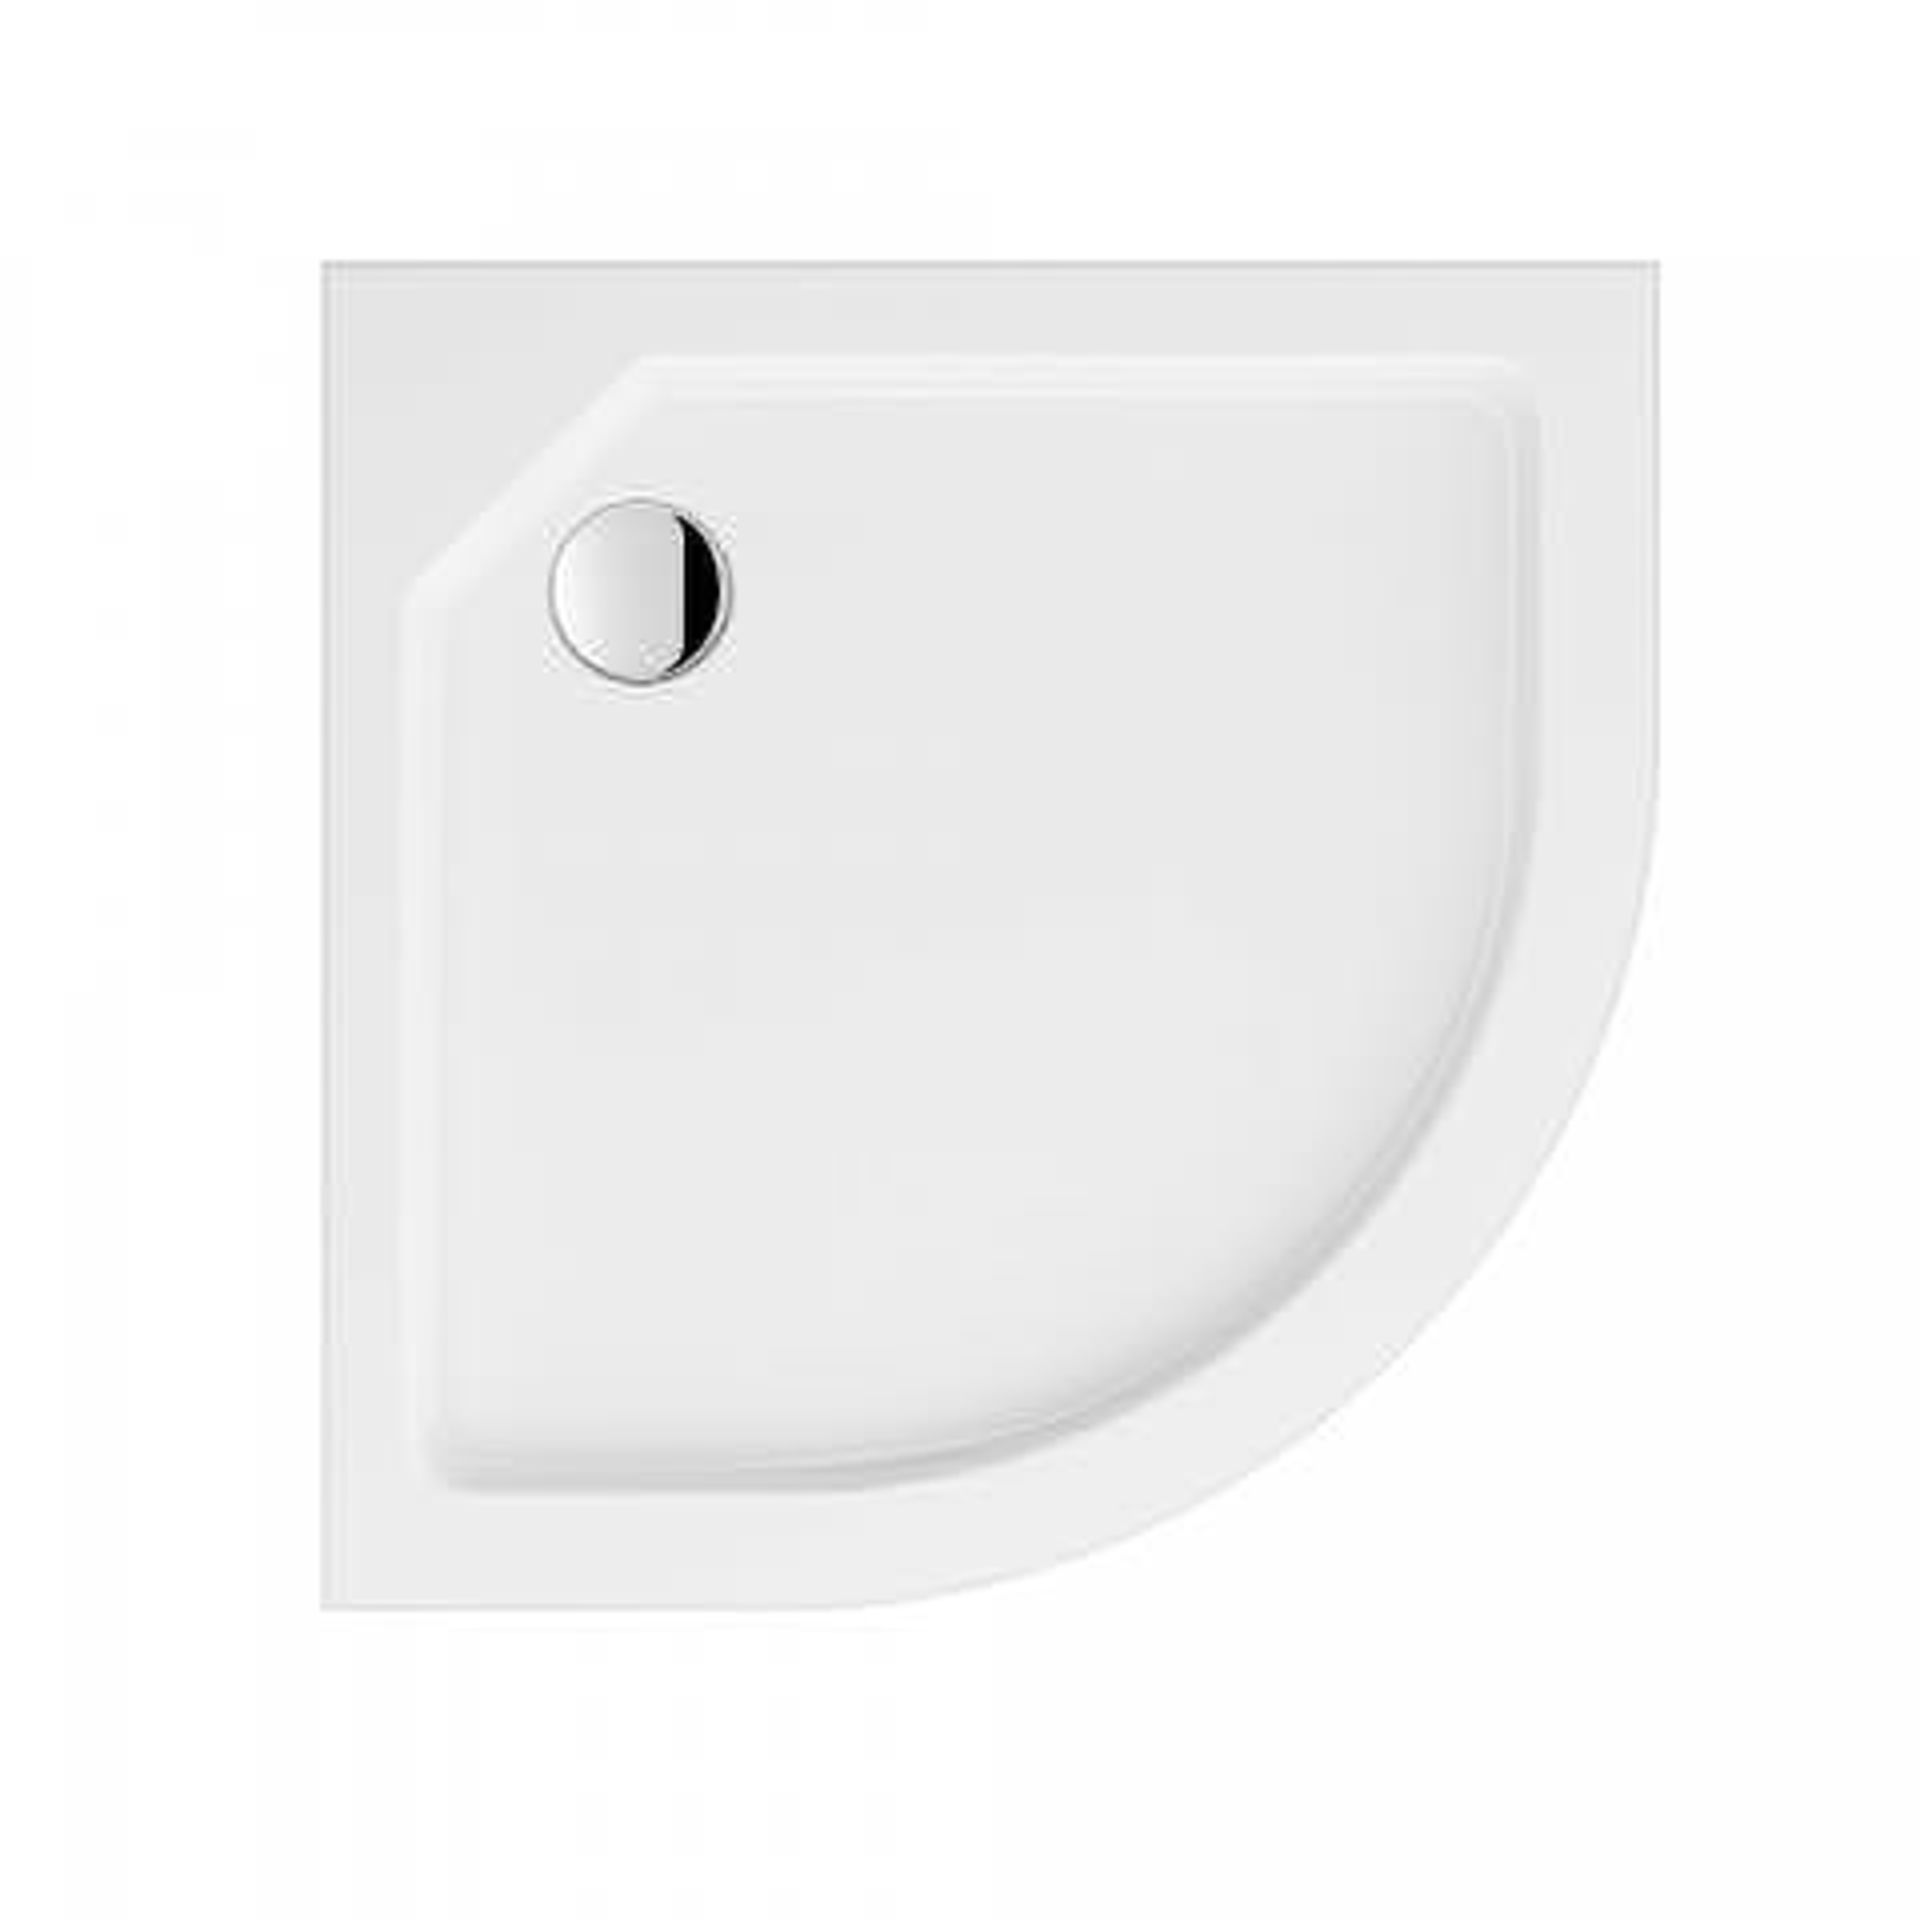 (M38) 760x900mm Quadrant Easy Plumb Shower Tray. RRP £179.99. Our brilliant white ultra slim trays - Image 2 of 2